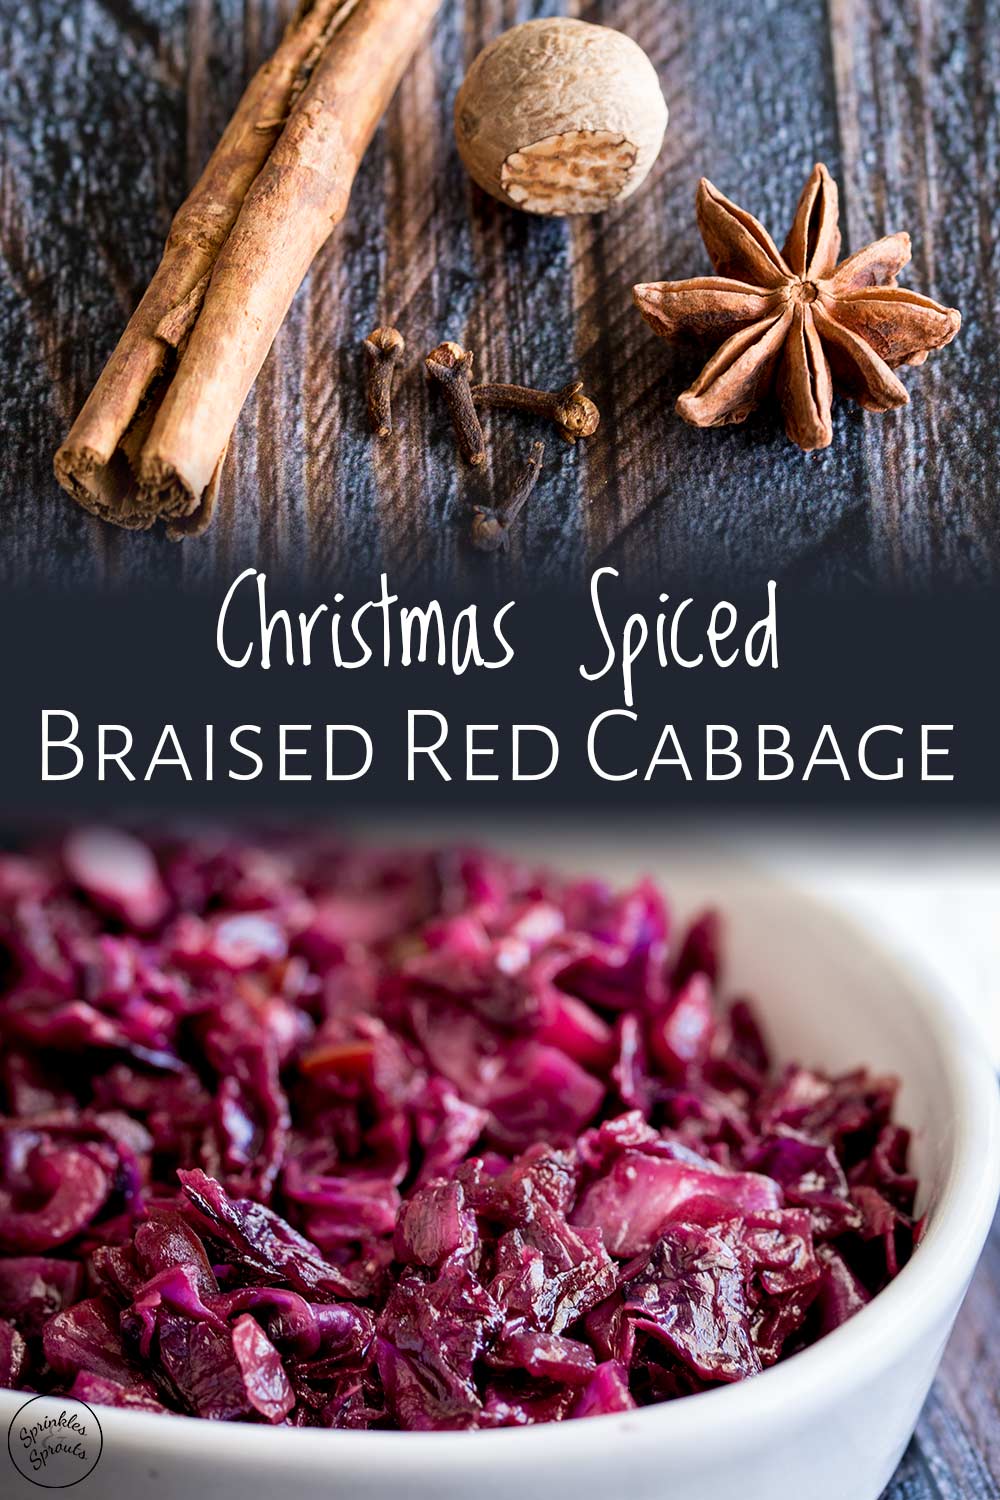 split picture of the spices and then the bowl of red cabbage with text at the top